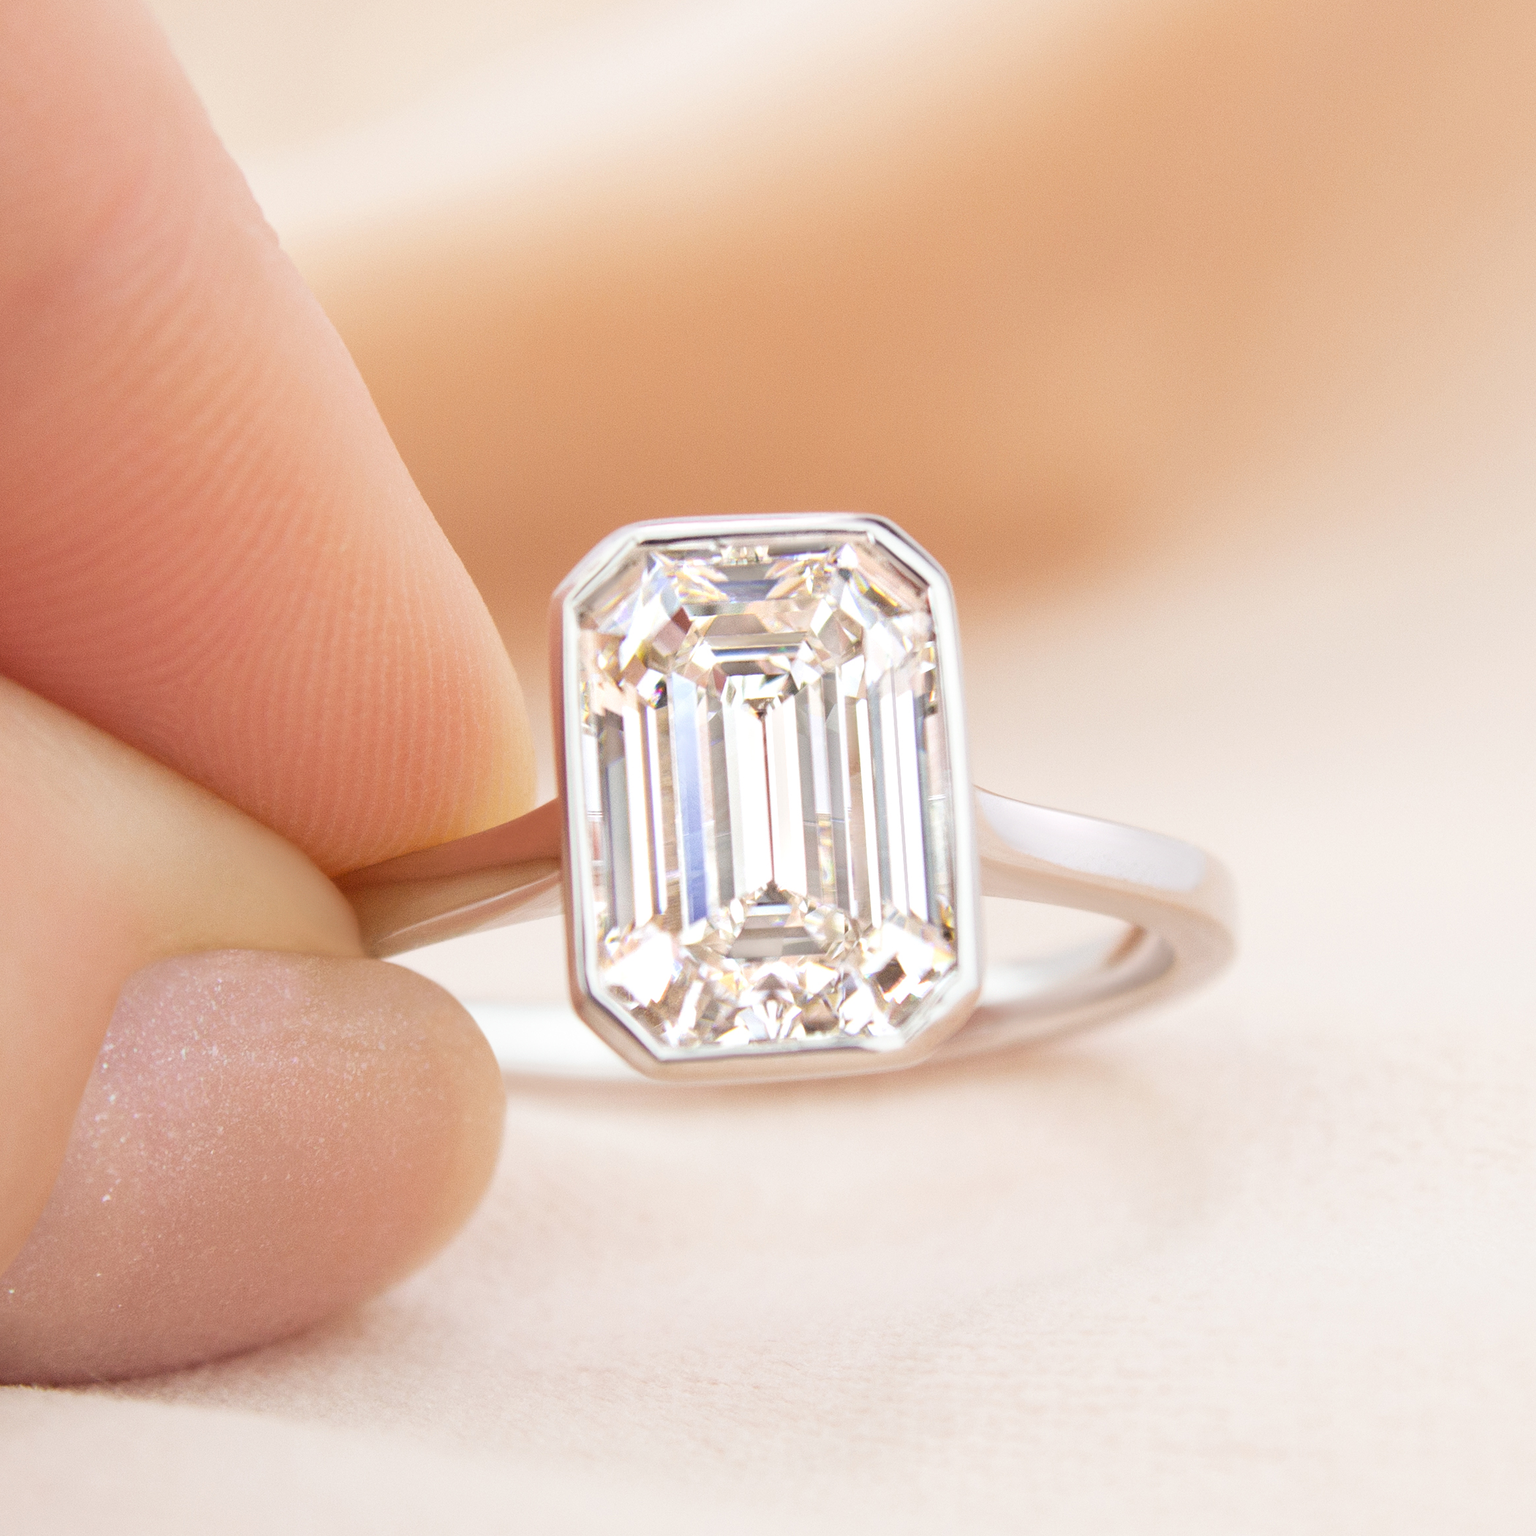 The 9 Engagement Ring Trends You Need to Know for 2022